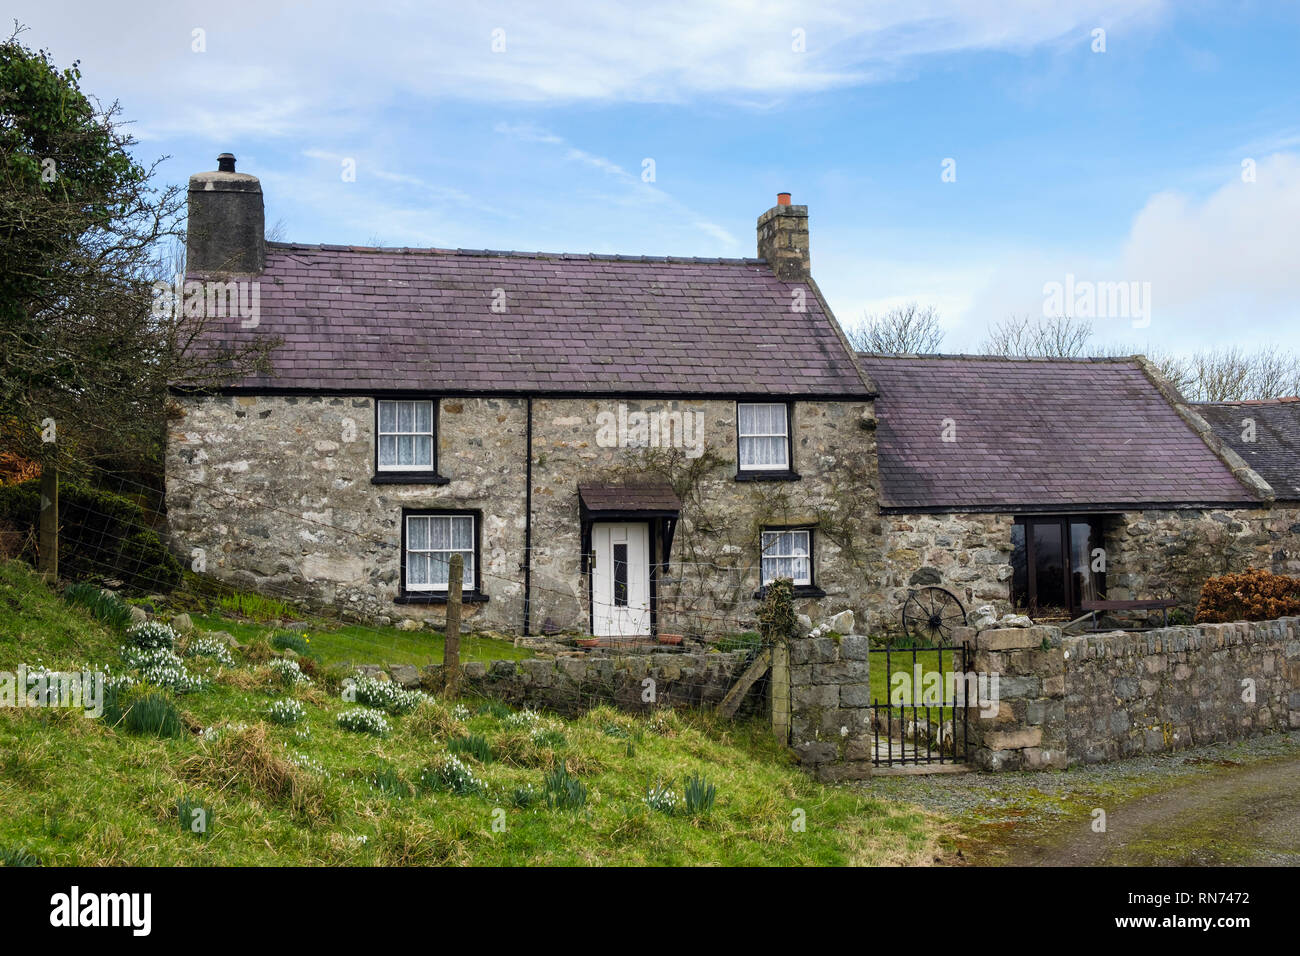 A renovated traditional Welsh stone farm cottage on Llyn Peninsular with Snowdrops growing outside. Trefor, Gwynedd, Wales, UK, Britain Stock Photo